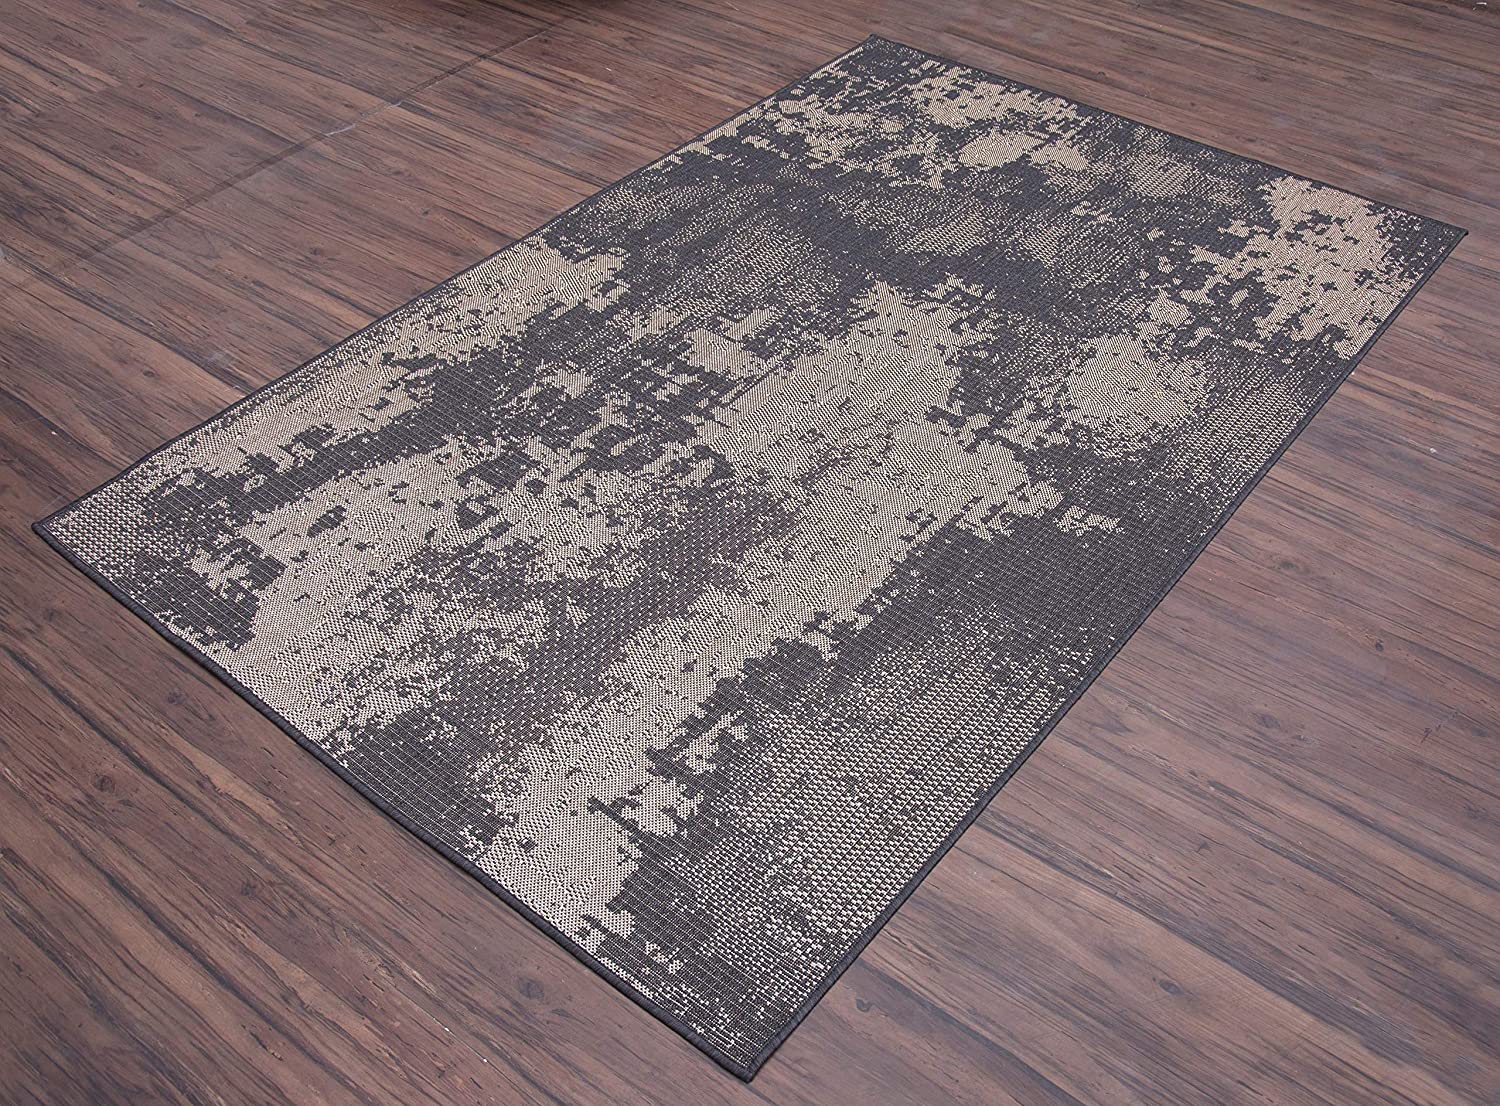 Abstract Vintage Rug - 5 ft. 3 in. x 7 ft. 6 in., Charcoal Gray, Indoor/Outdoor Area Rug with Distressed Pattern, Stain Resistant, Washable Rug | Stylish Area Rugs - image 3 of 8